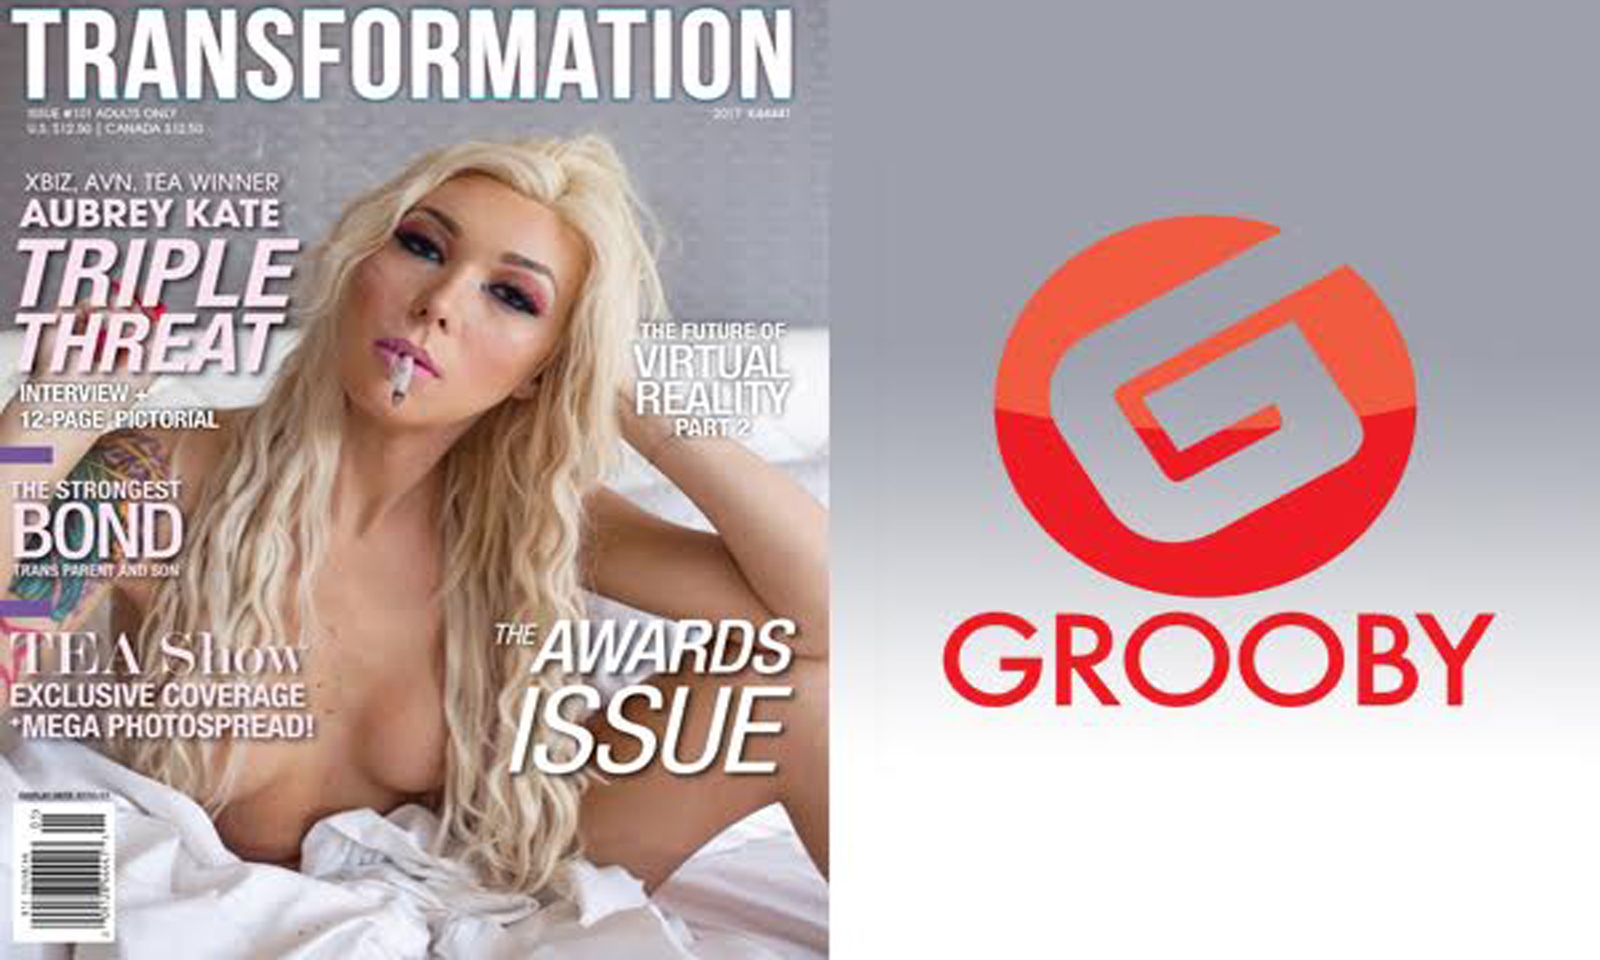 Grooby Takes Editorial Helm at 'Transformation' Magazine